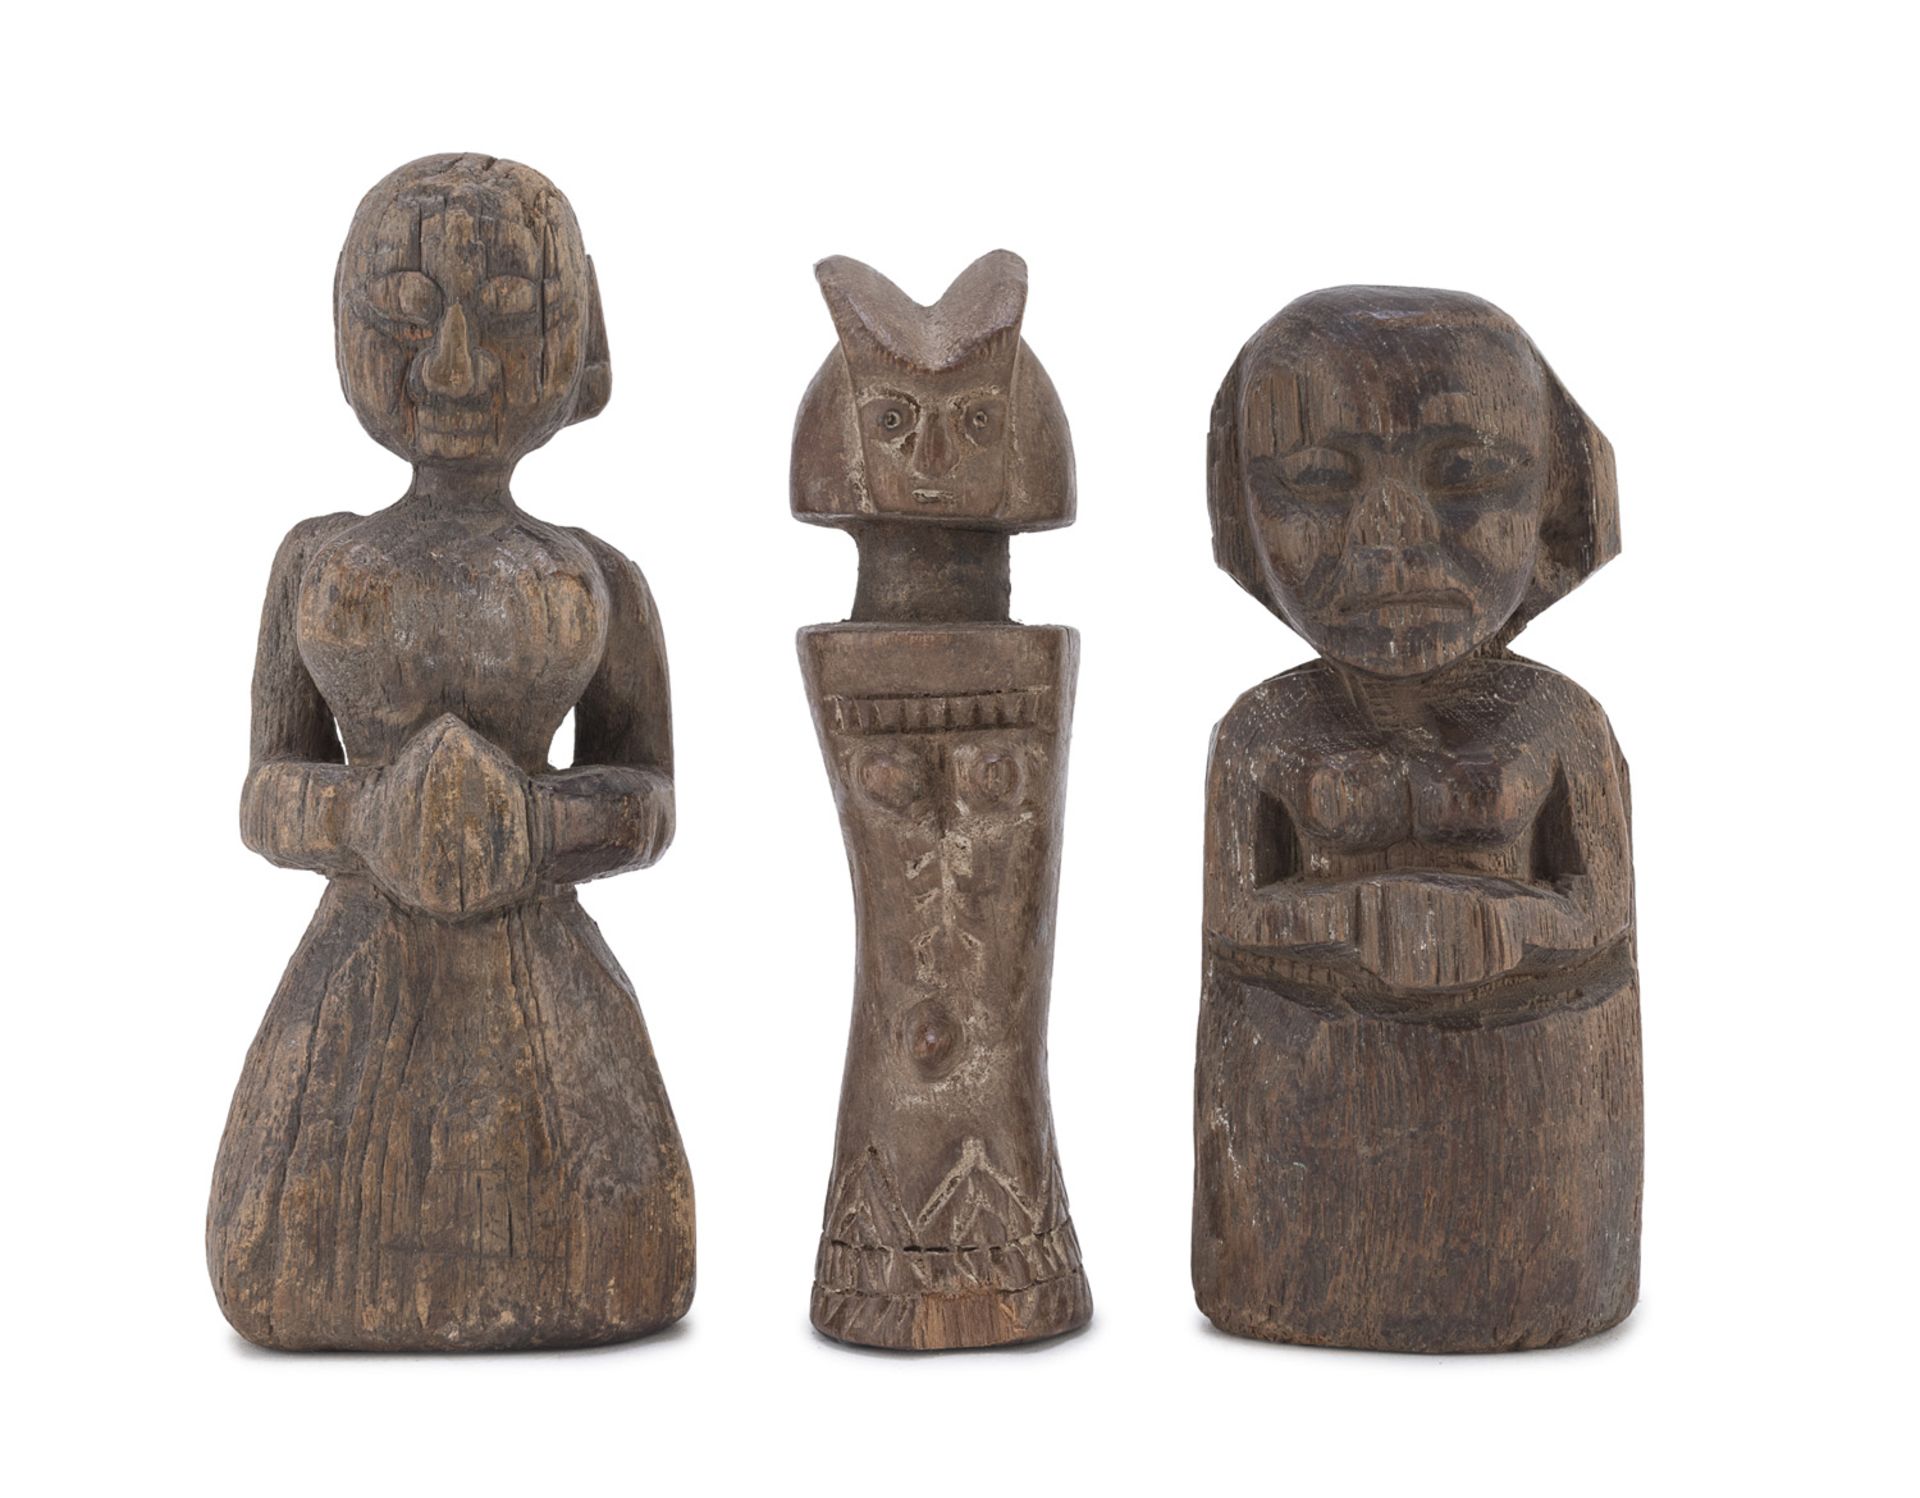 THREE AFRICAN WOOD SCULPTURES DEPICTING FEMALE FIGURES. 20TH CENTURY.